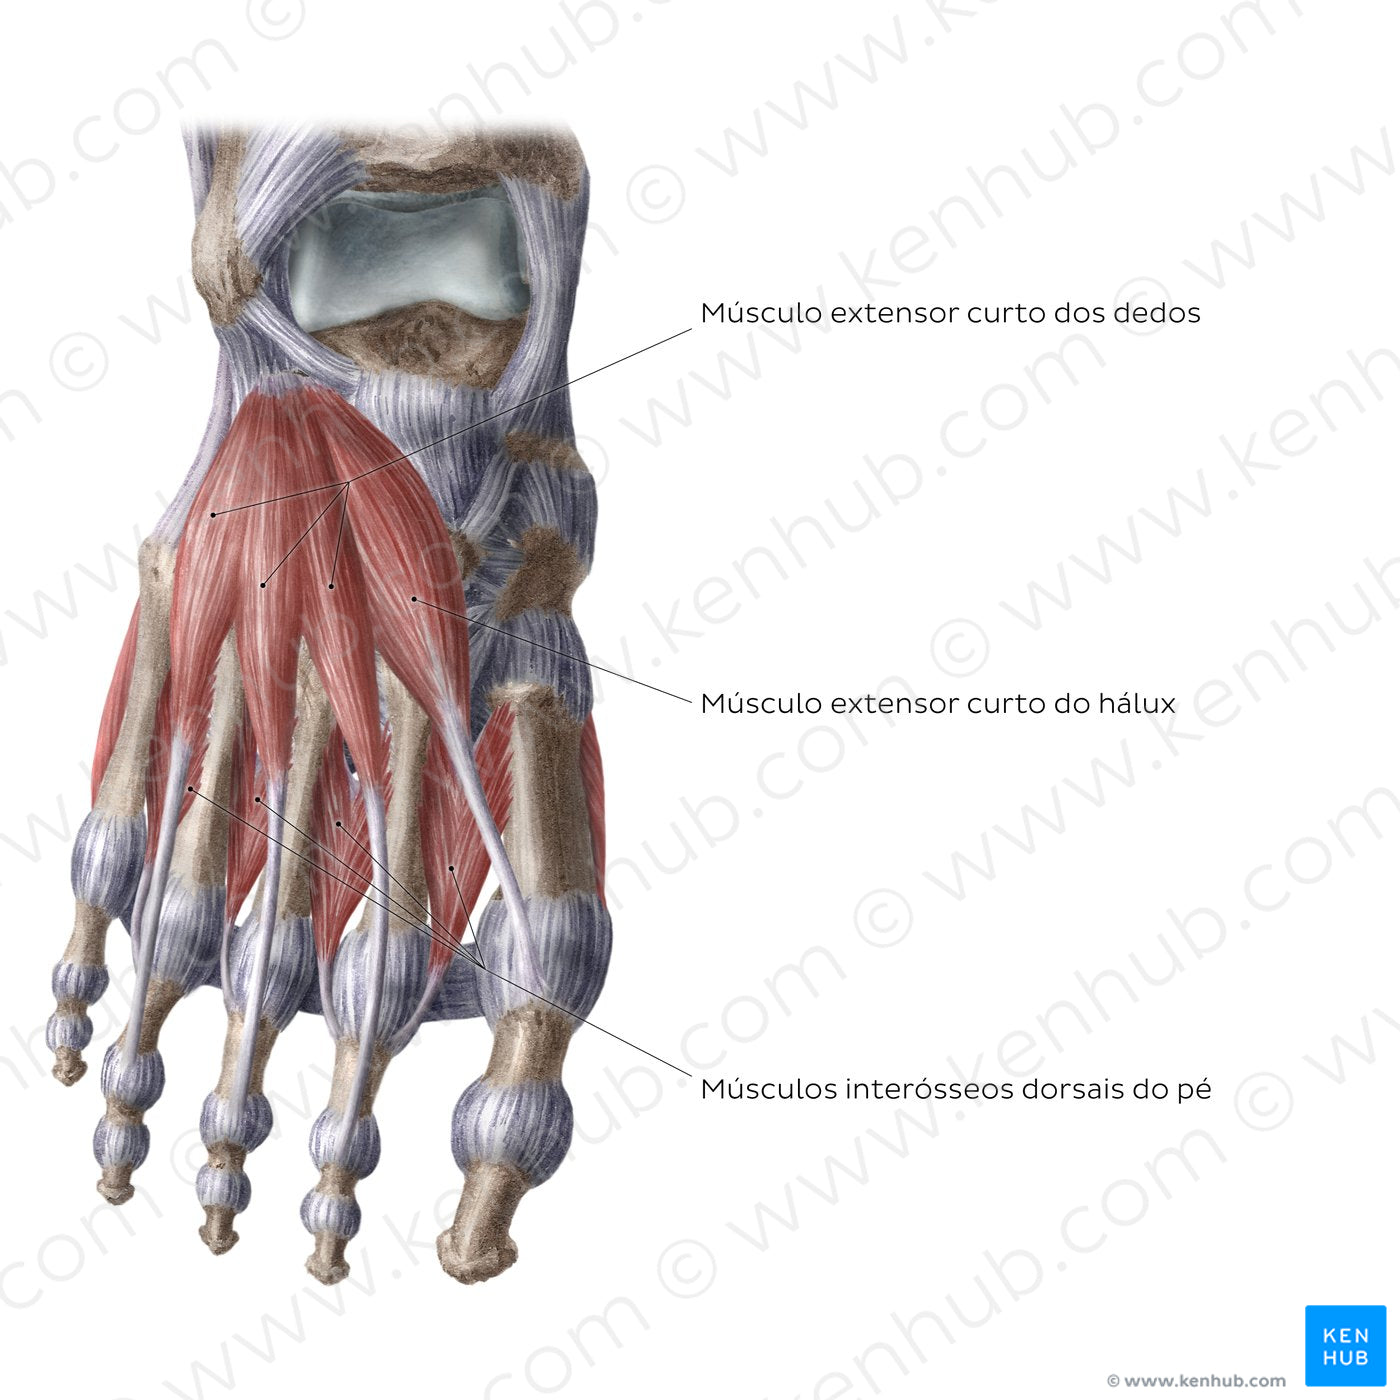 Dorsal muscles of the foot (Portuguese)